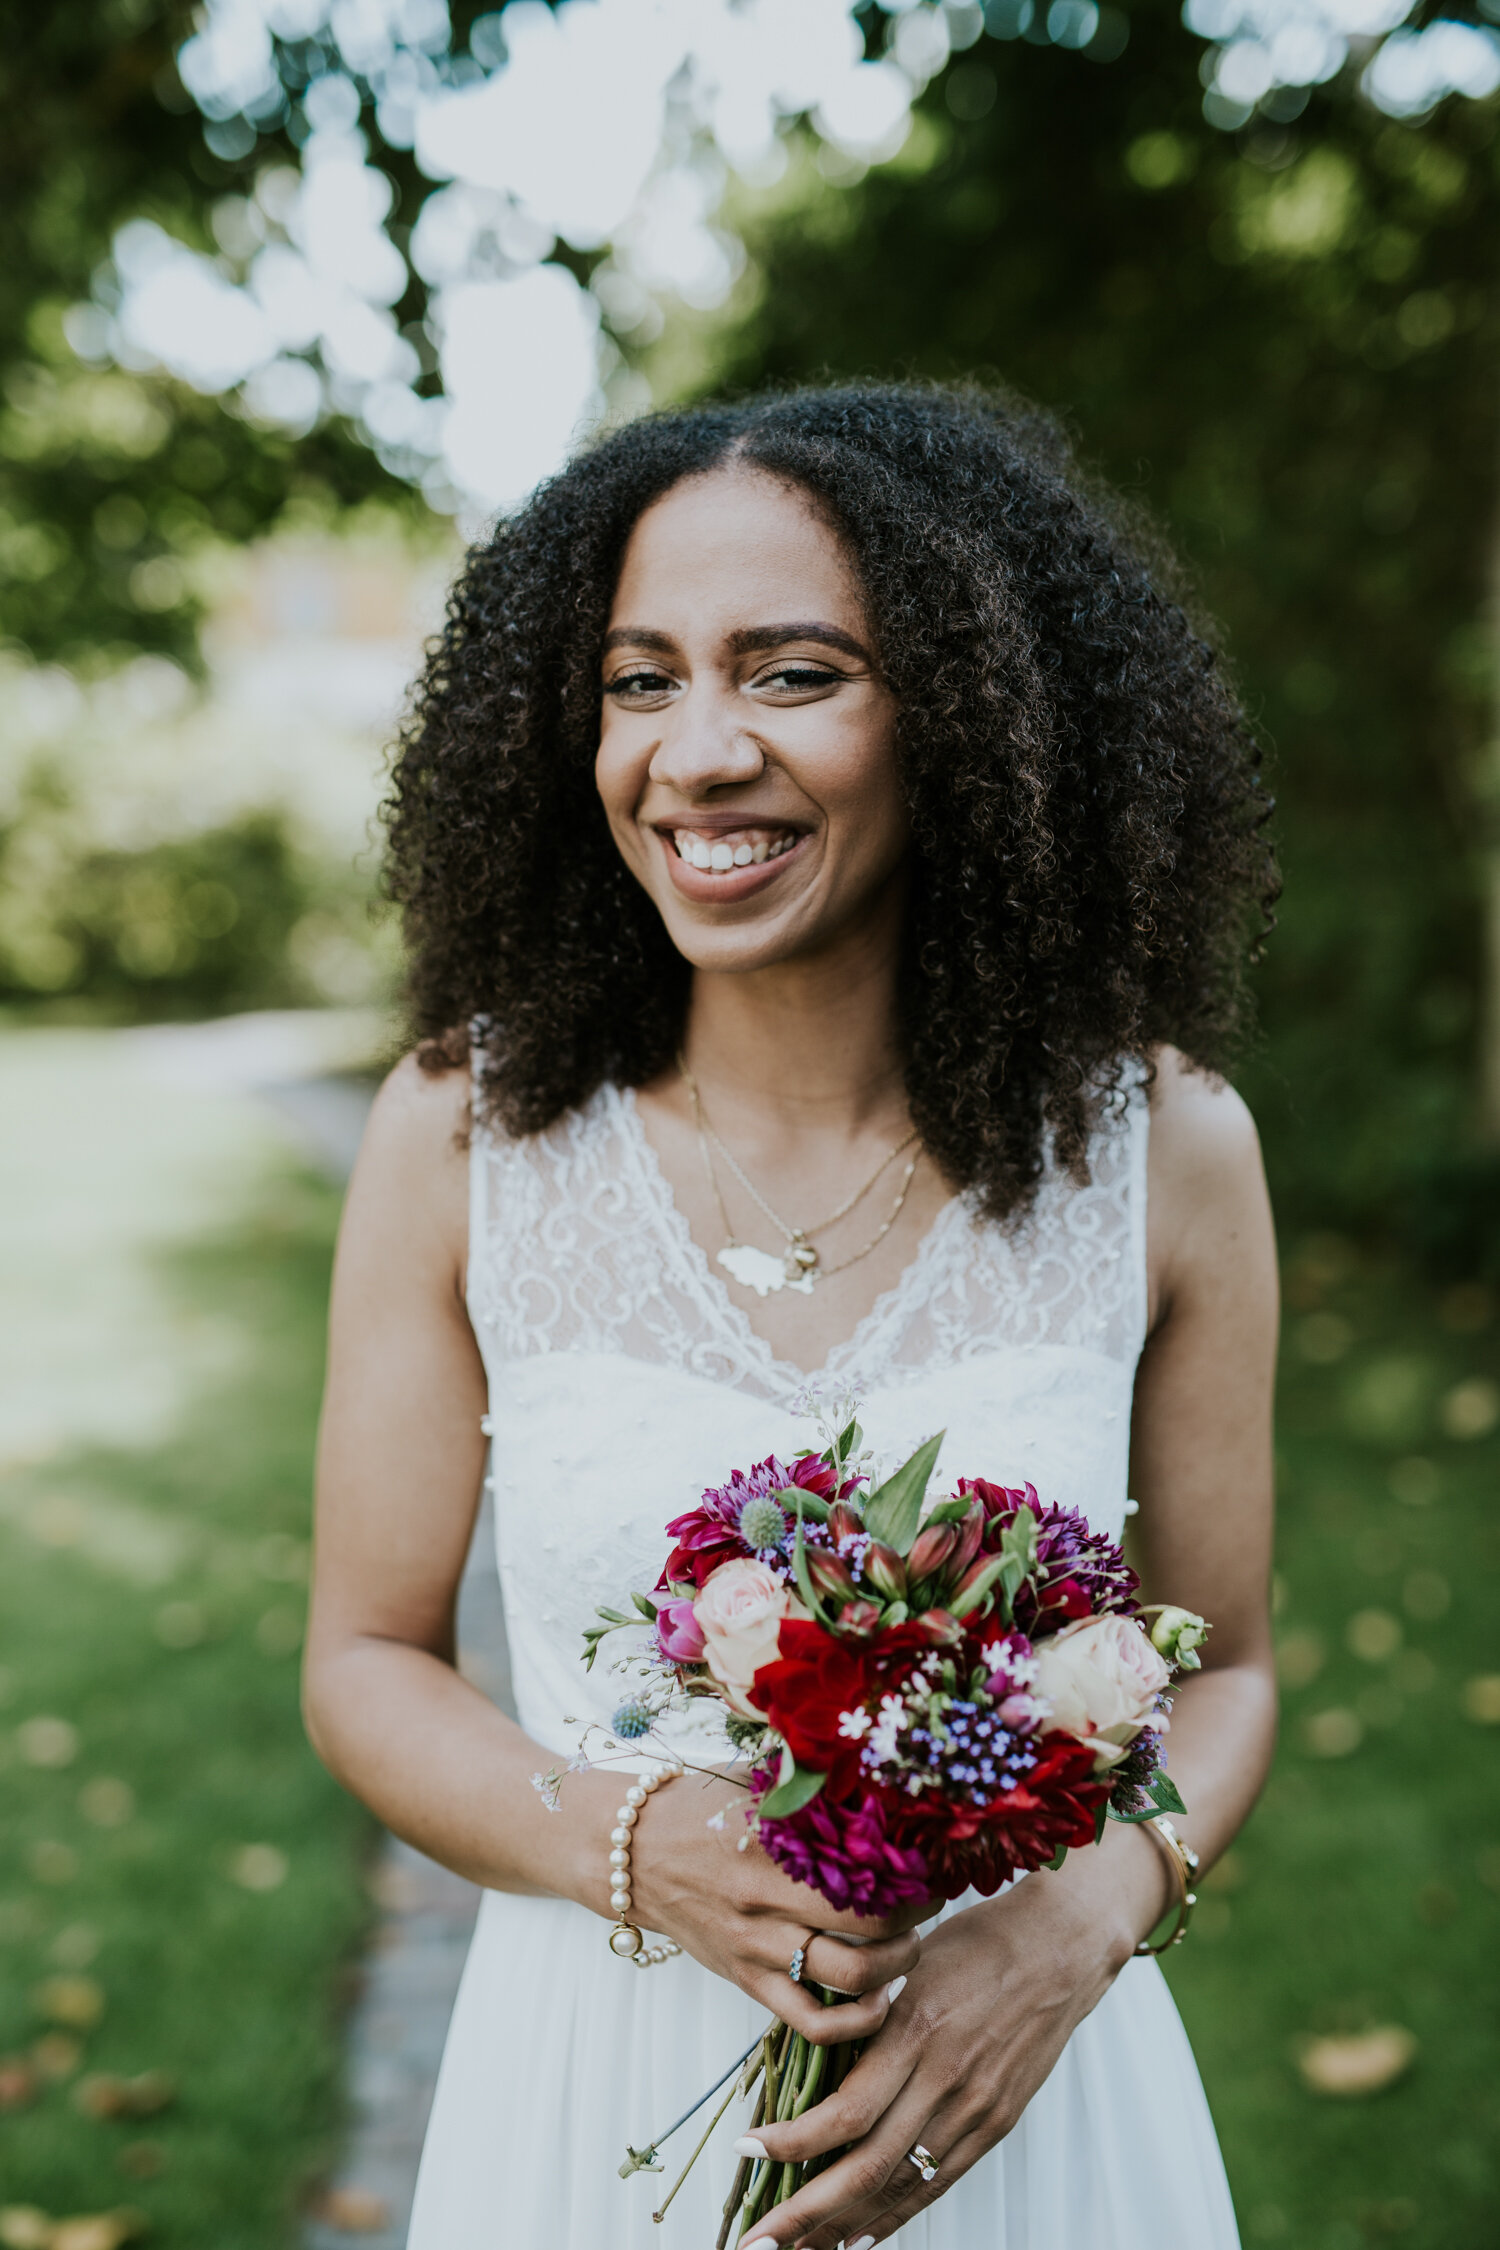 Black bride with natural hair | hair and makeup for brides | full-service destination wedding | get married in Denmark | Aero Island | Danish Island Weddings | Denmark wedding planners and venue